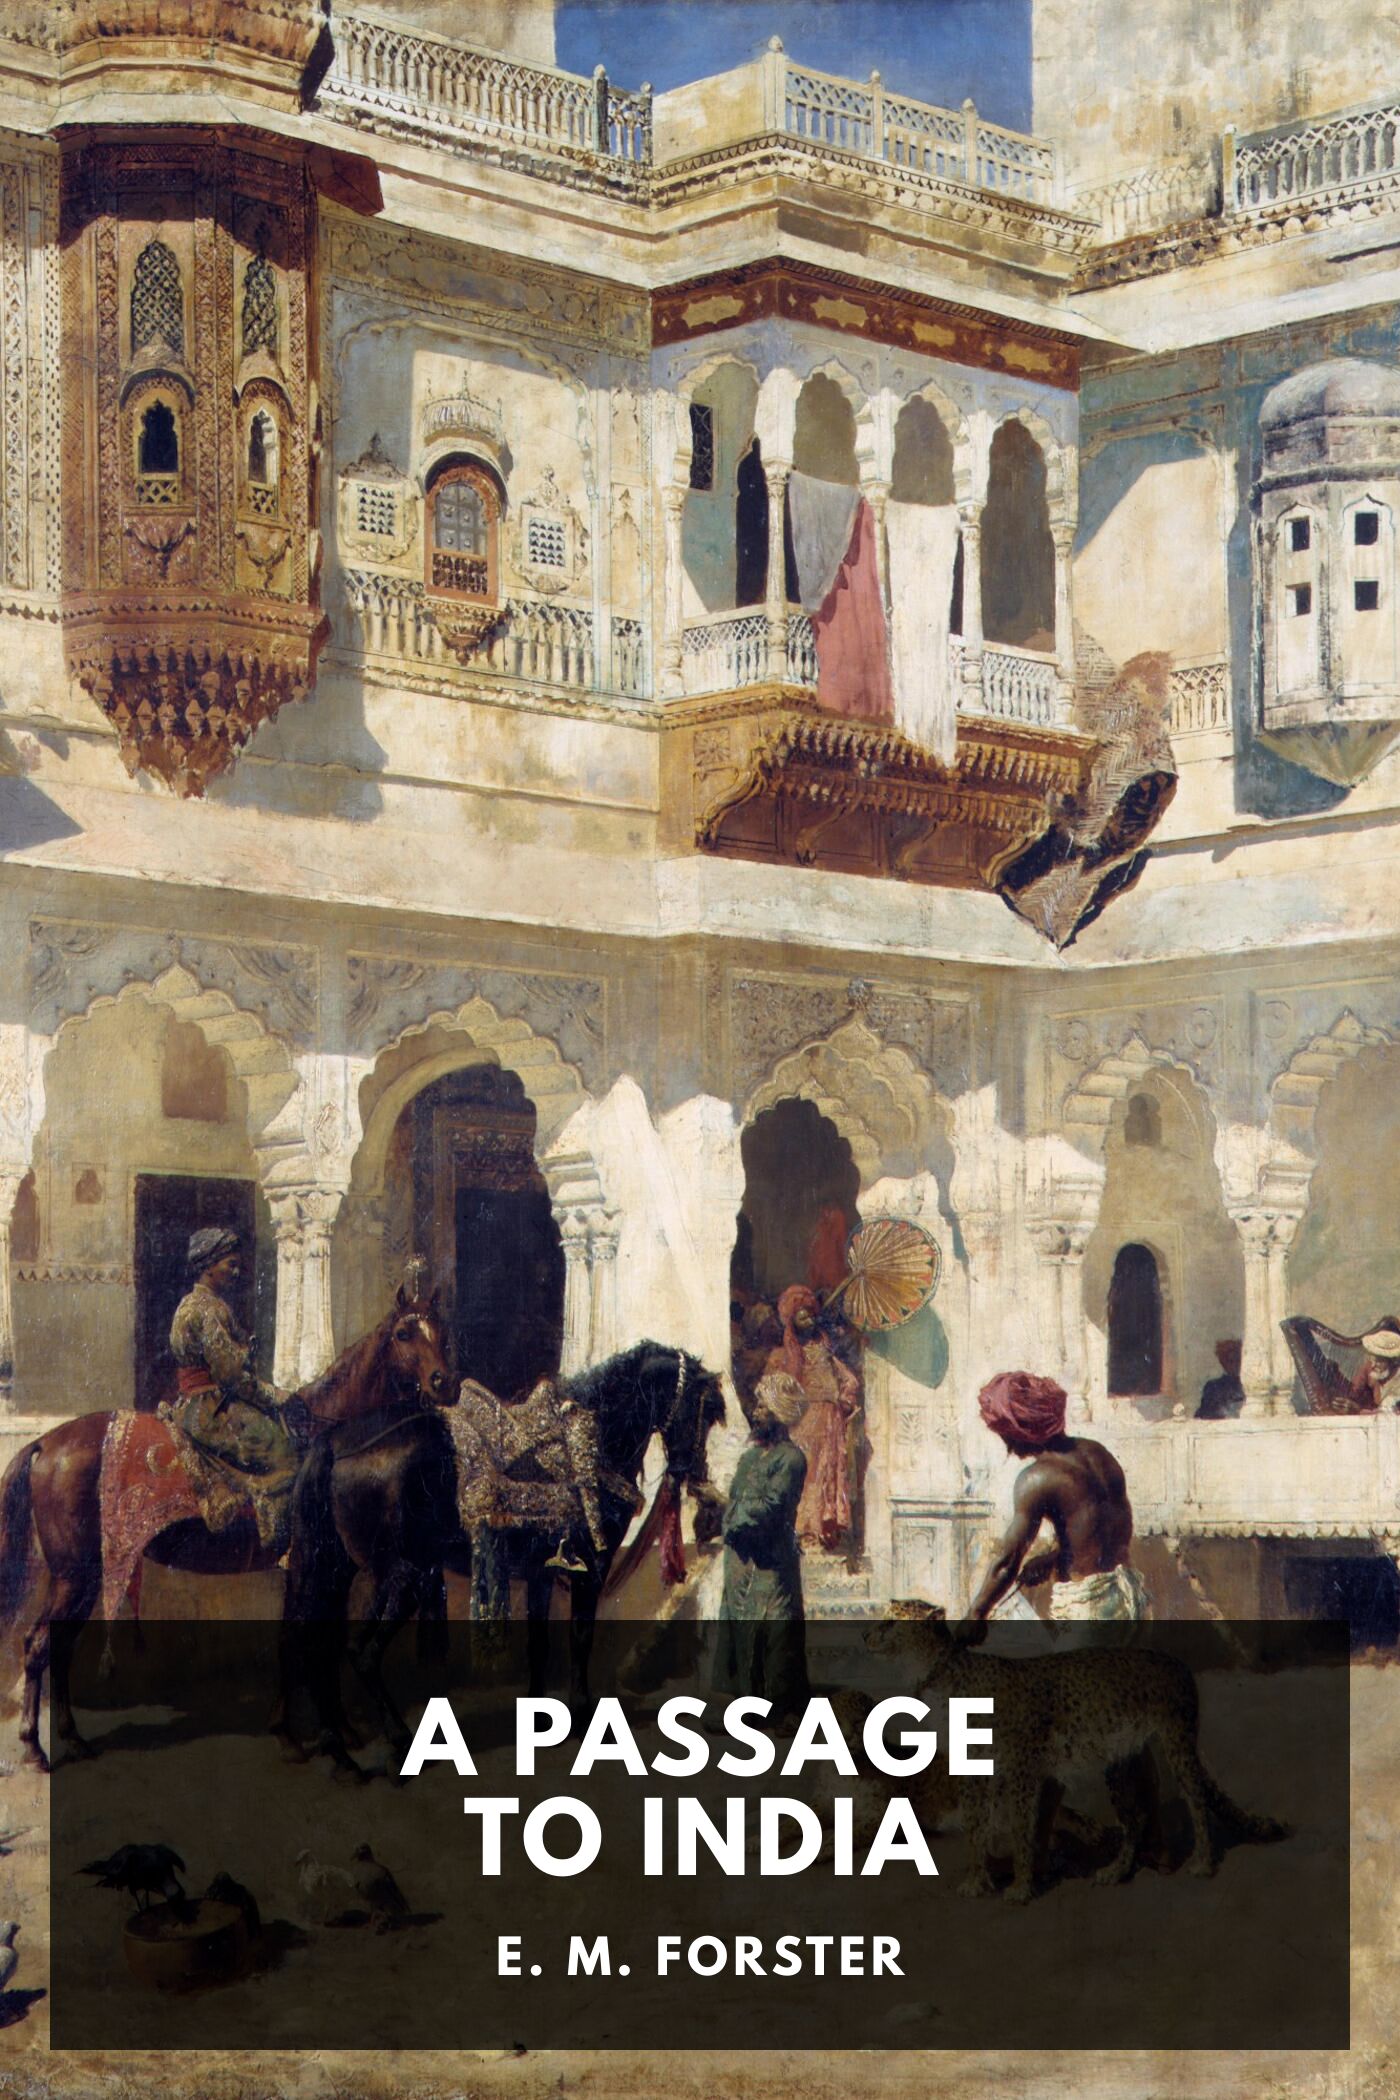 a passage to india full text pdf download